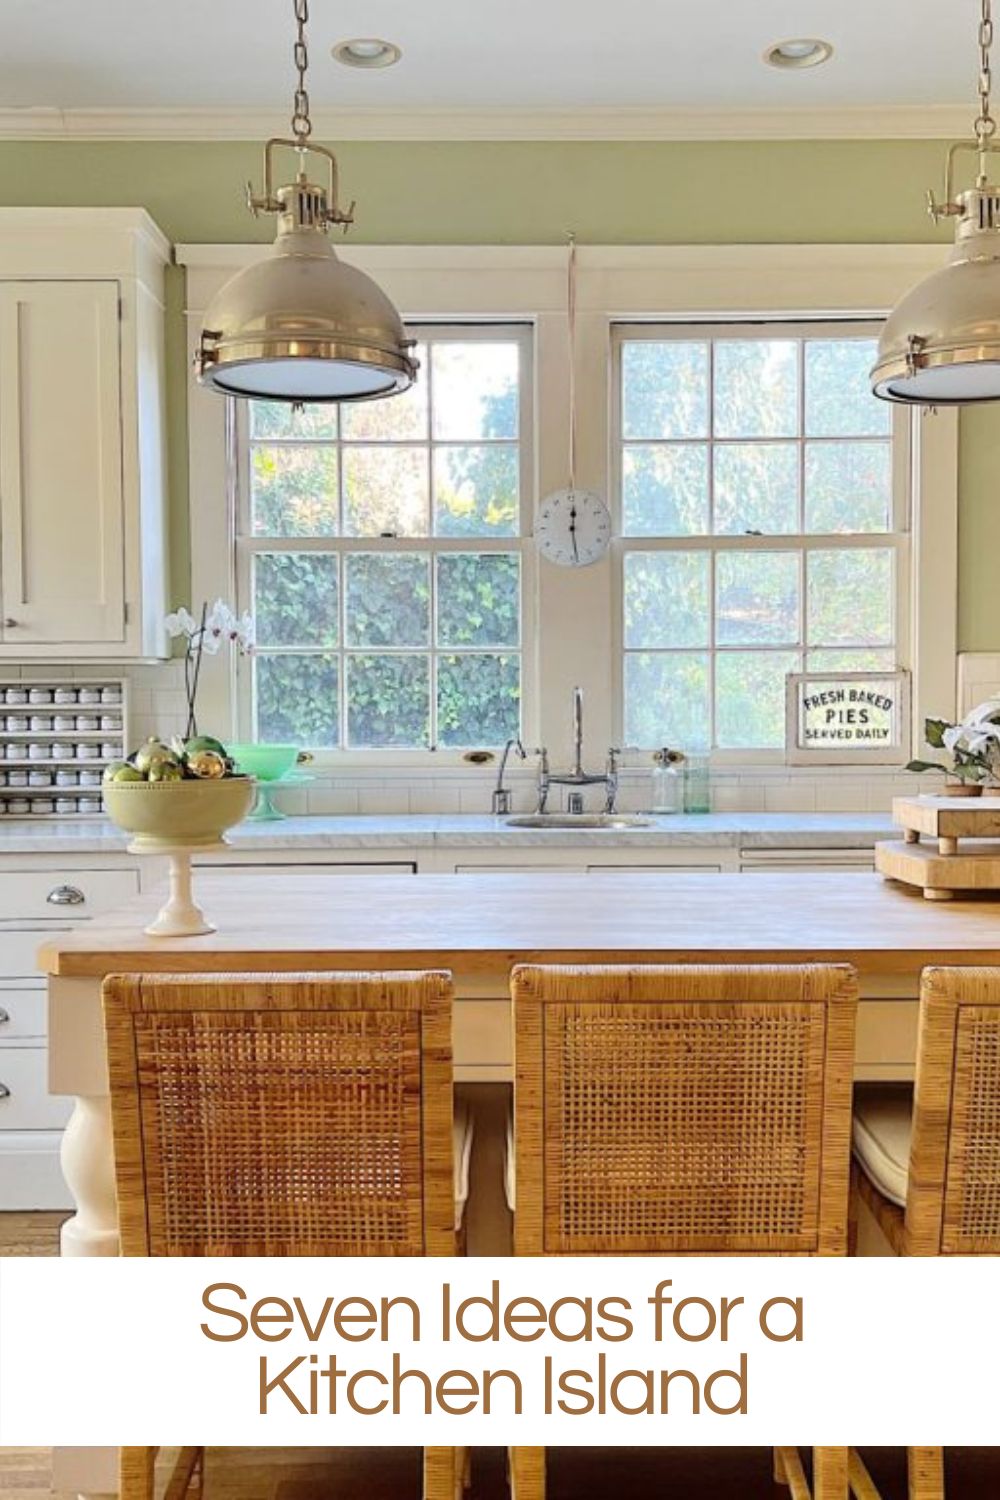 Kitchen Islands are not only practical, but they increase the value of your home. Today I am sharing my white kitchen islands and seven ideas for yours.